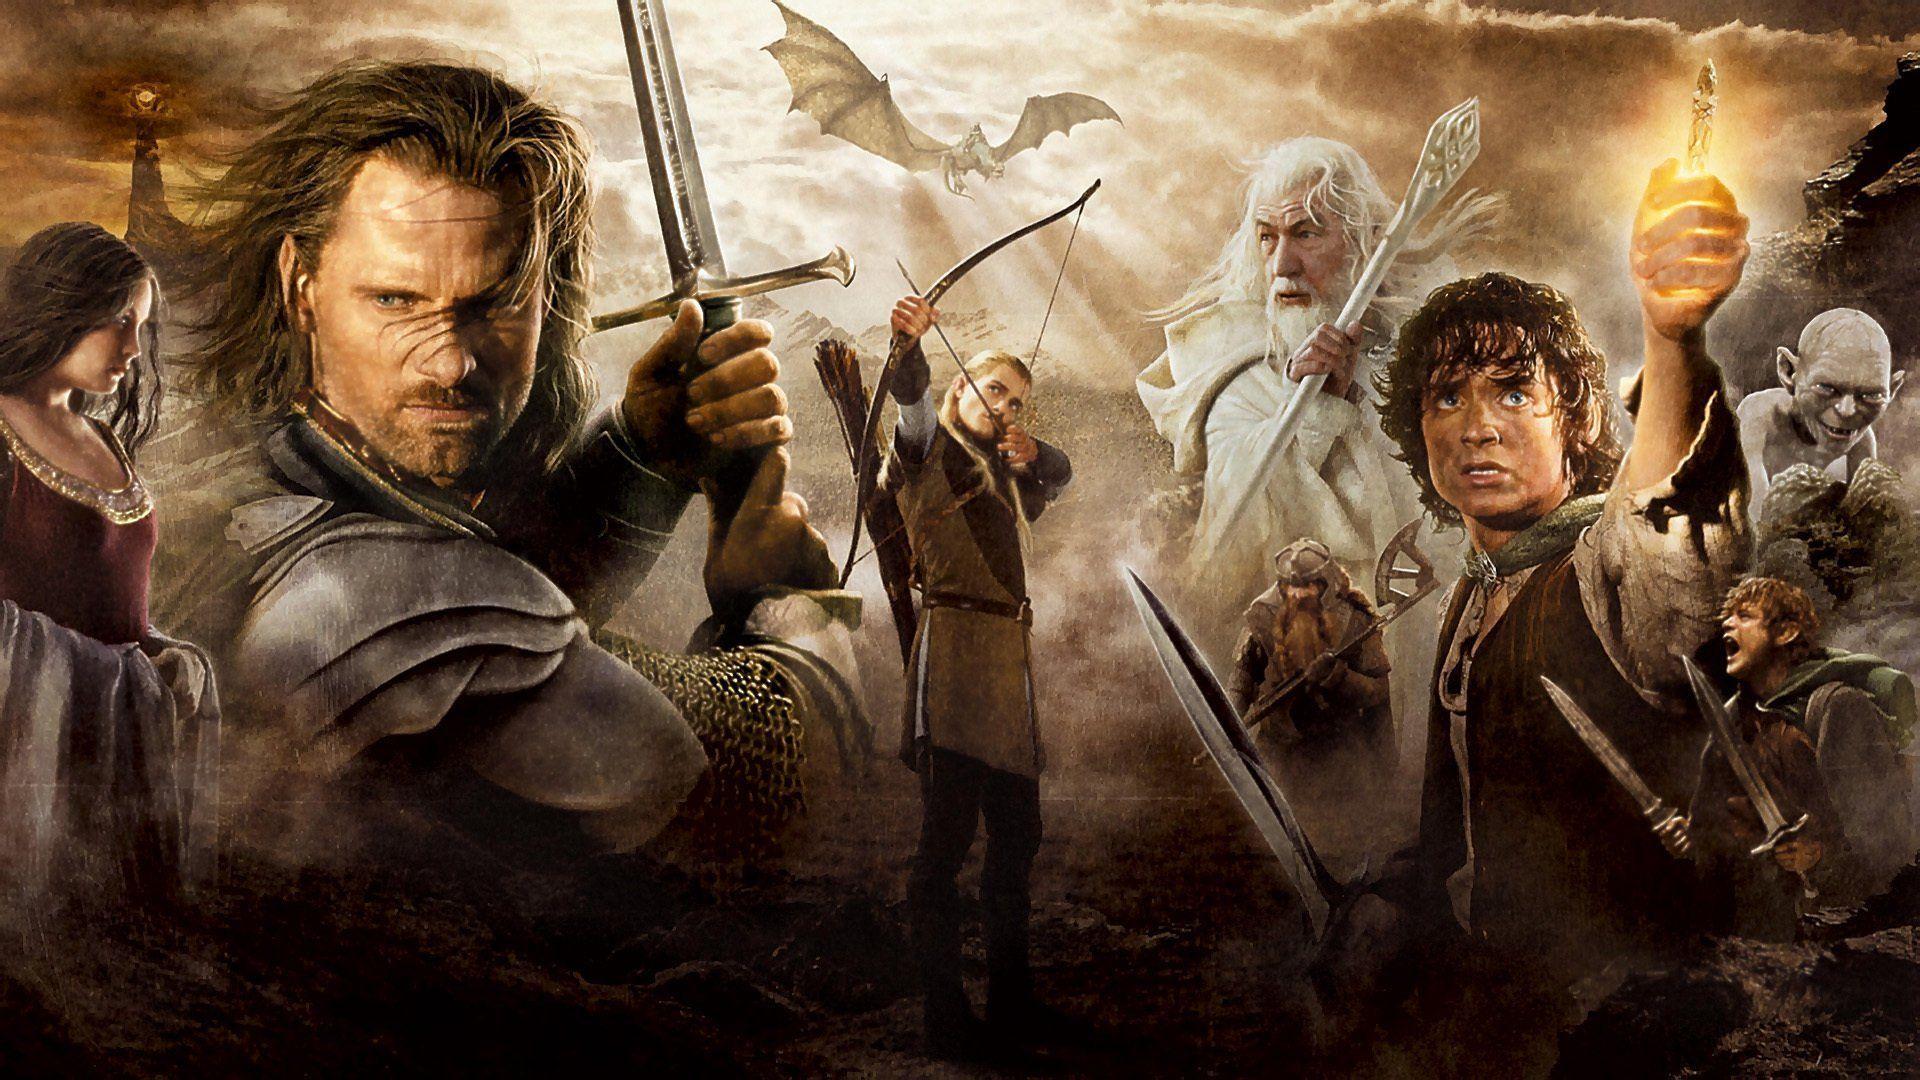 film movie the lord of the rings lord of the rings frodo frodo